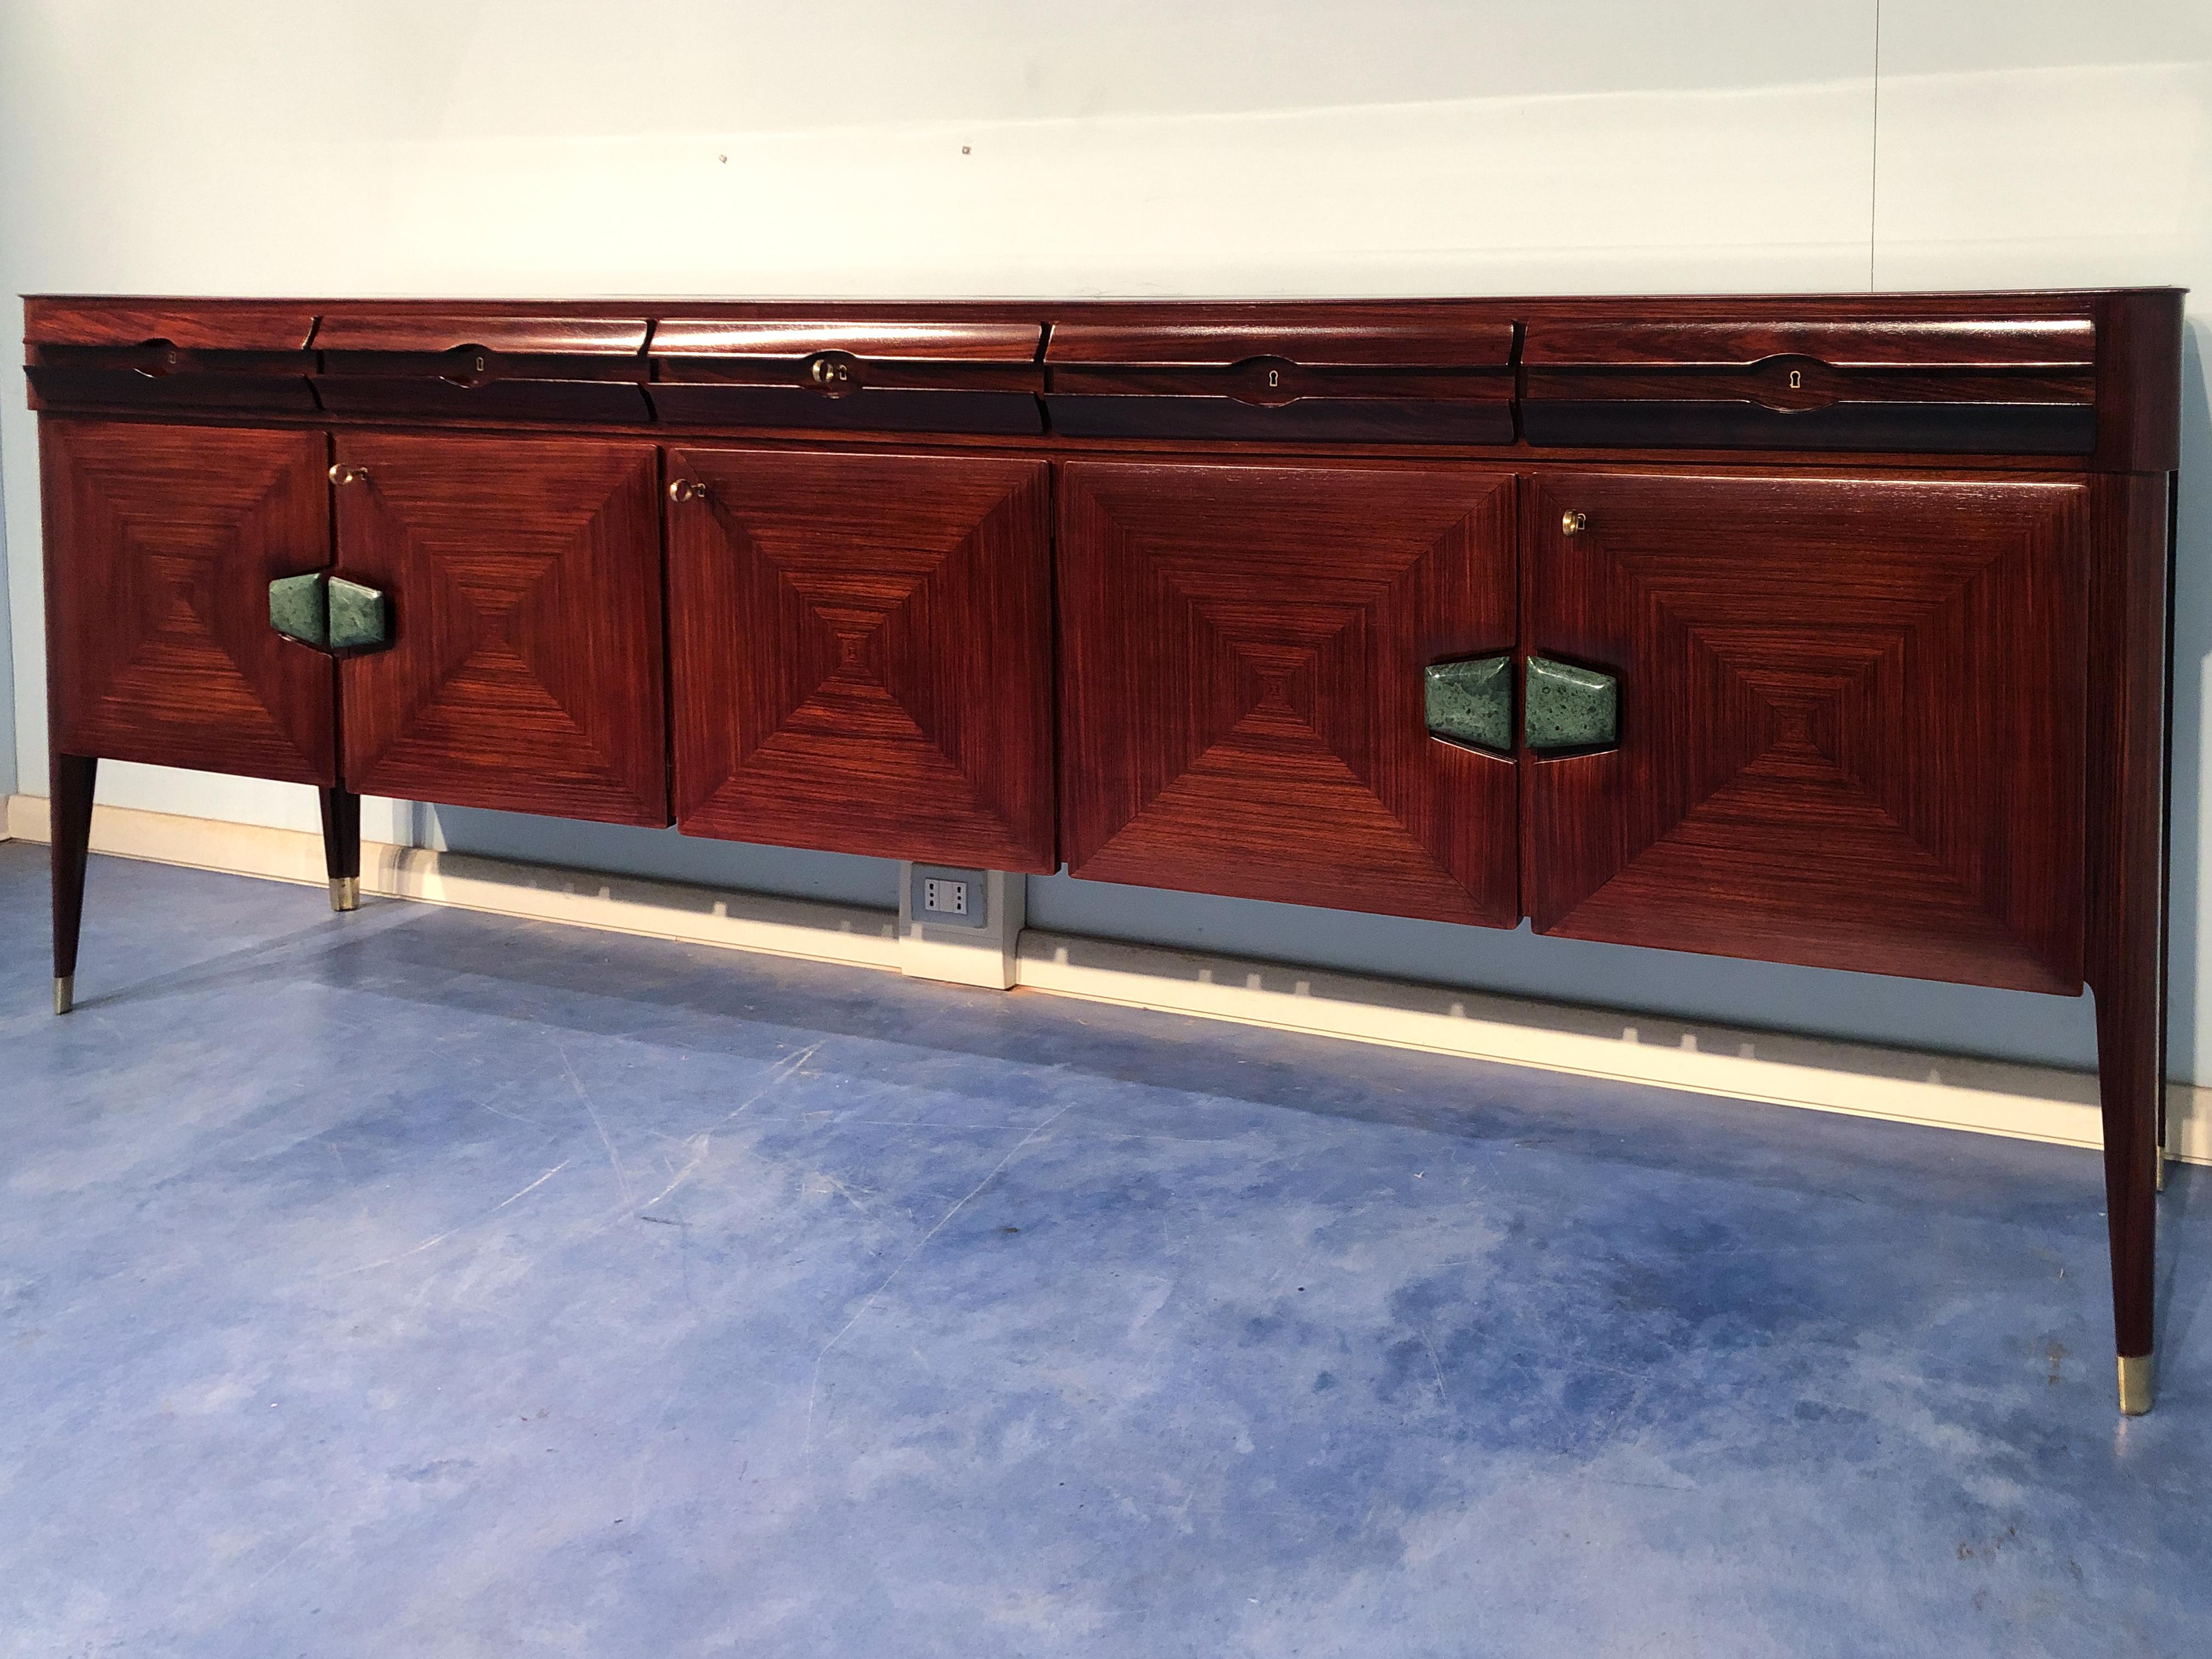 Italian Mid-Century Sideboard with Marble Handles by Vittorio Dassi, 1950 For Sale 11